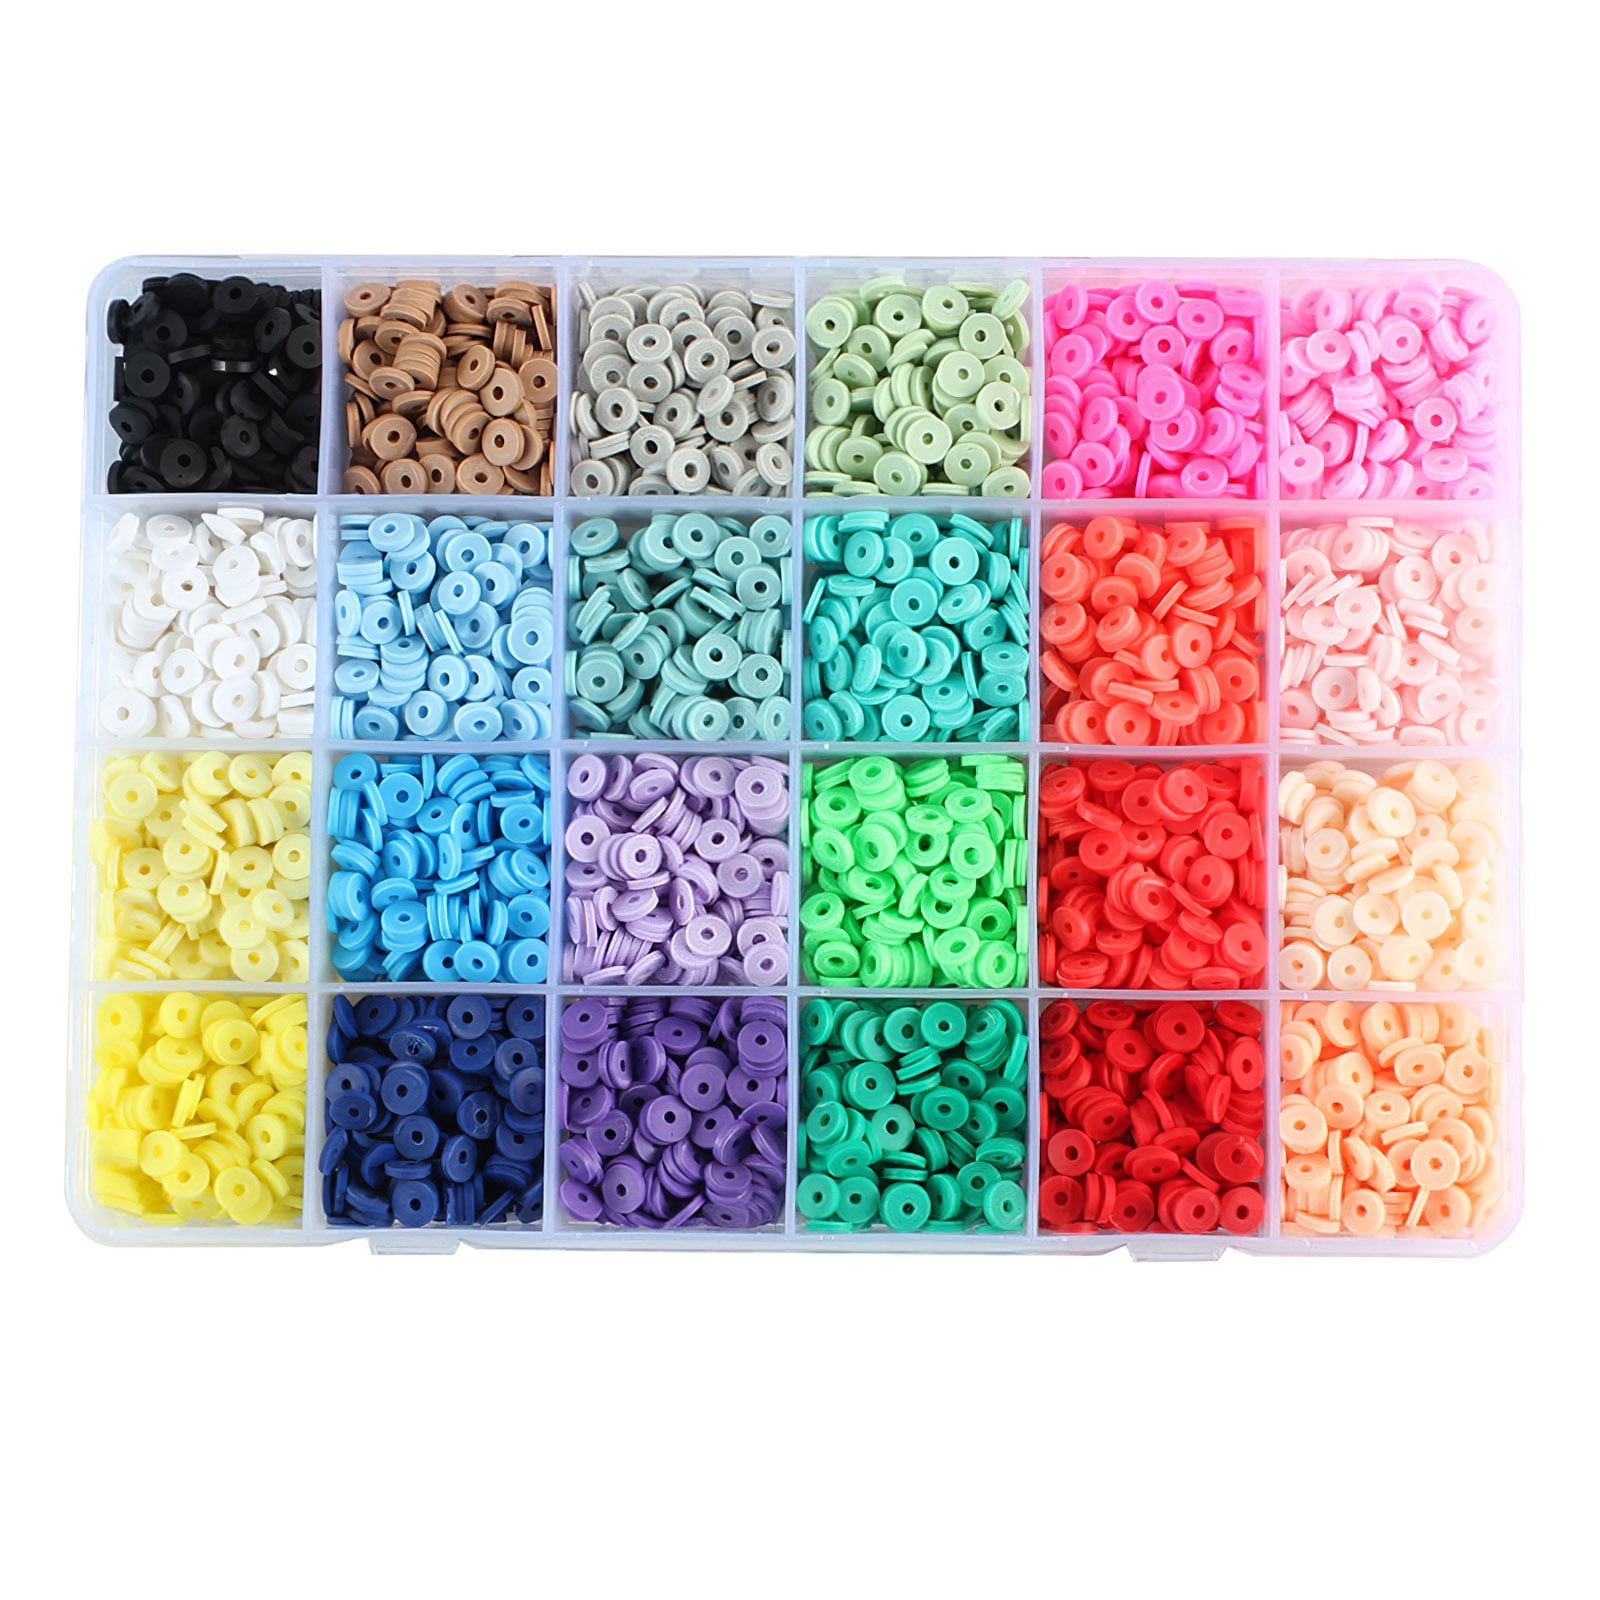  Quefe 4800pcs Clay Beads for Jewelry Making, 48 Colors